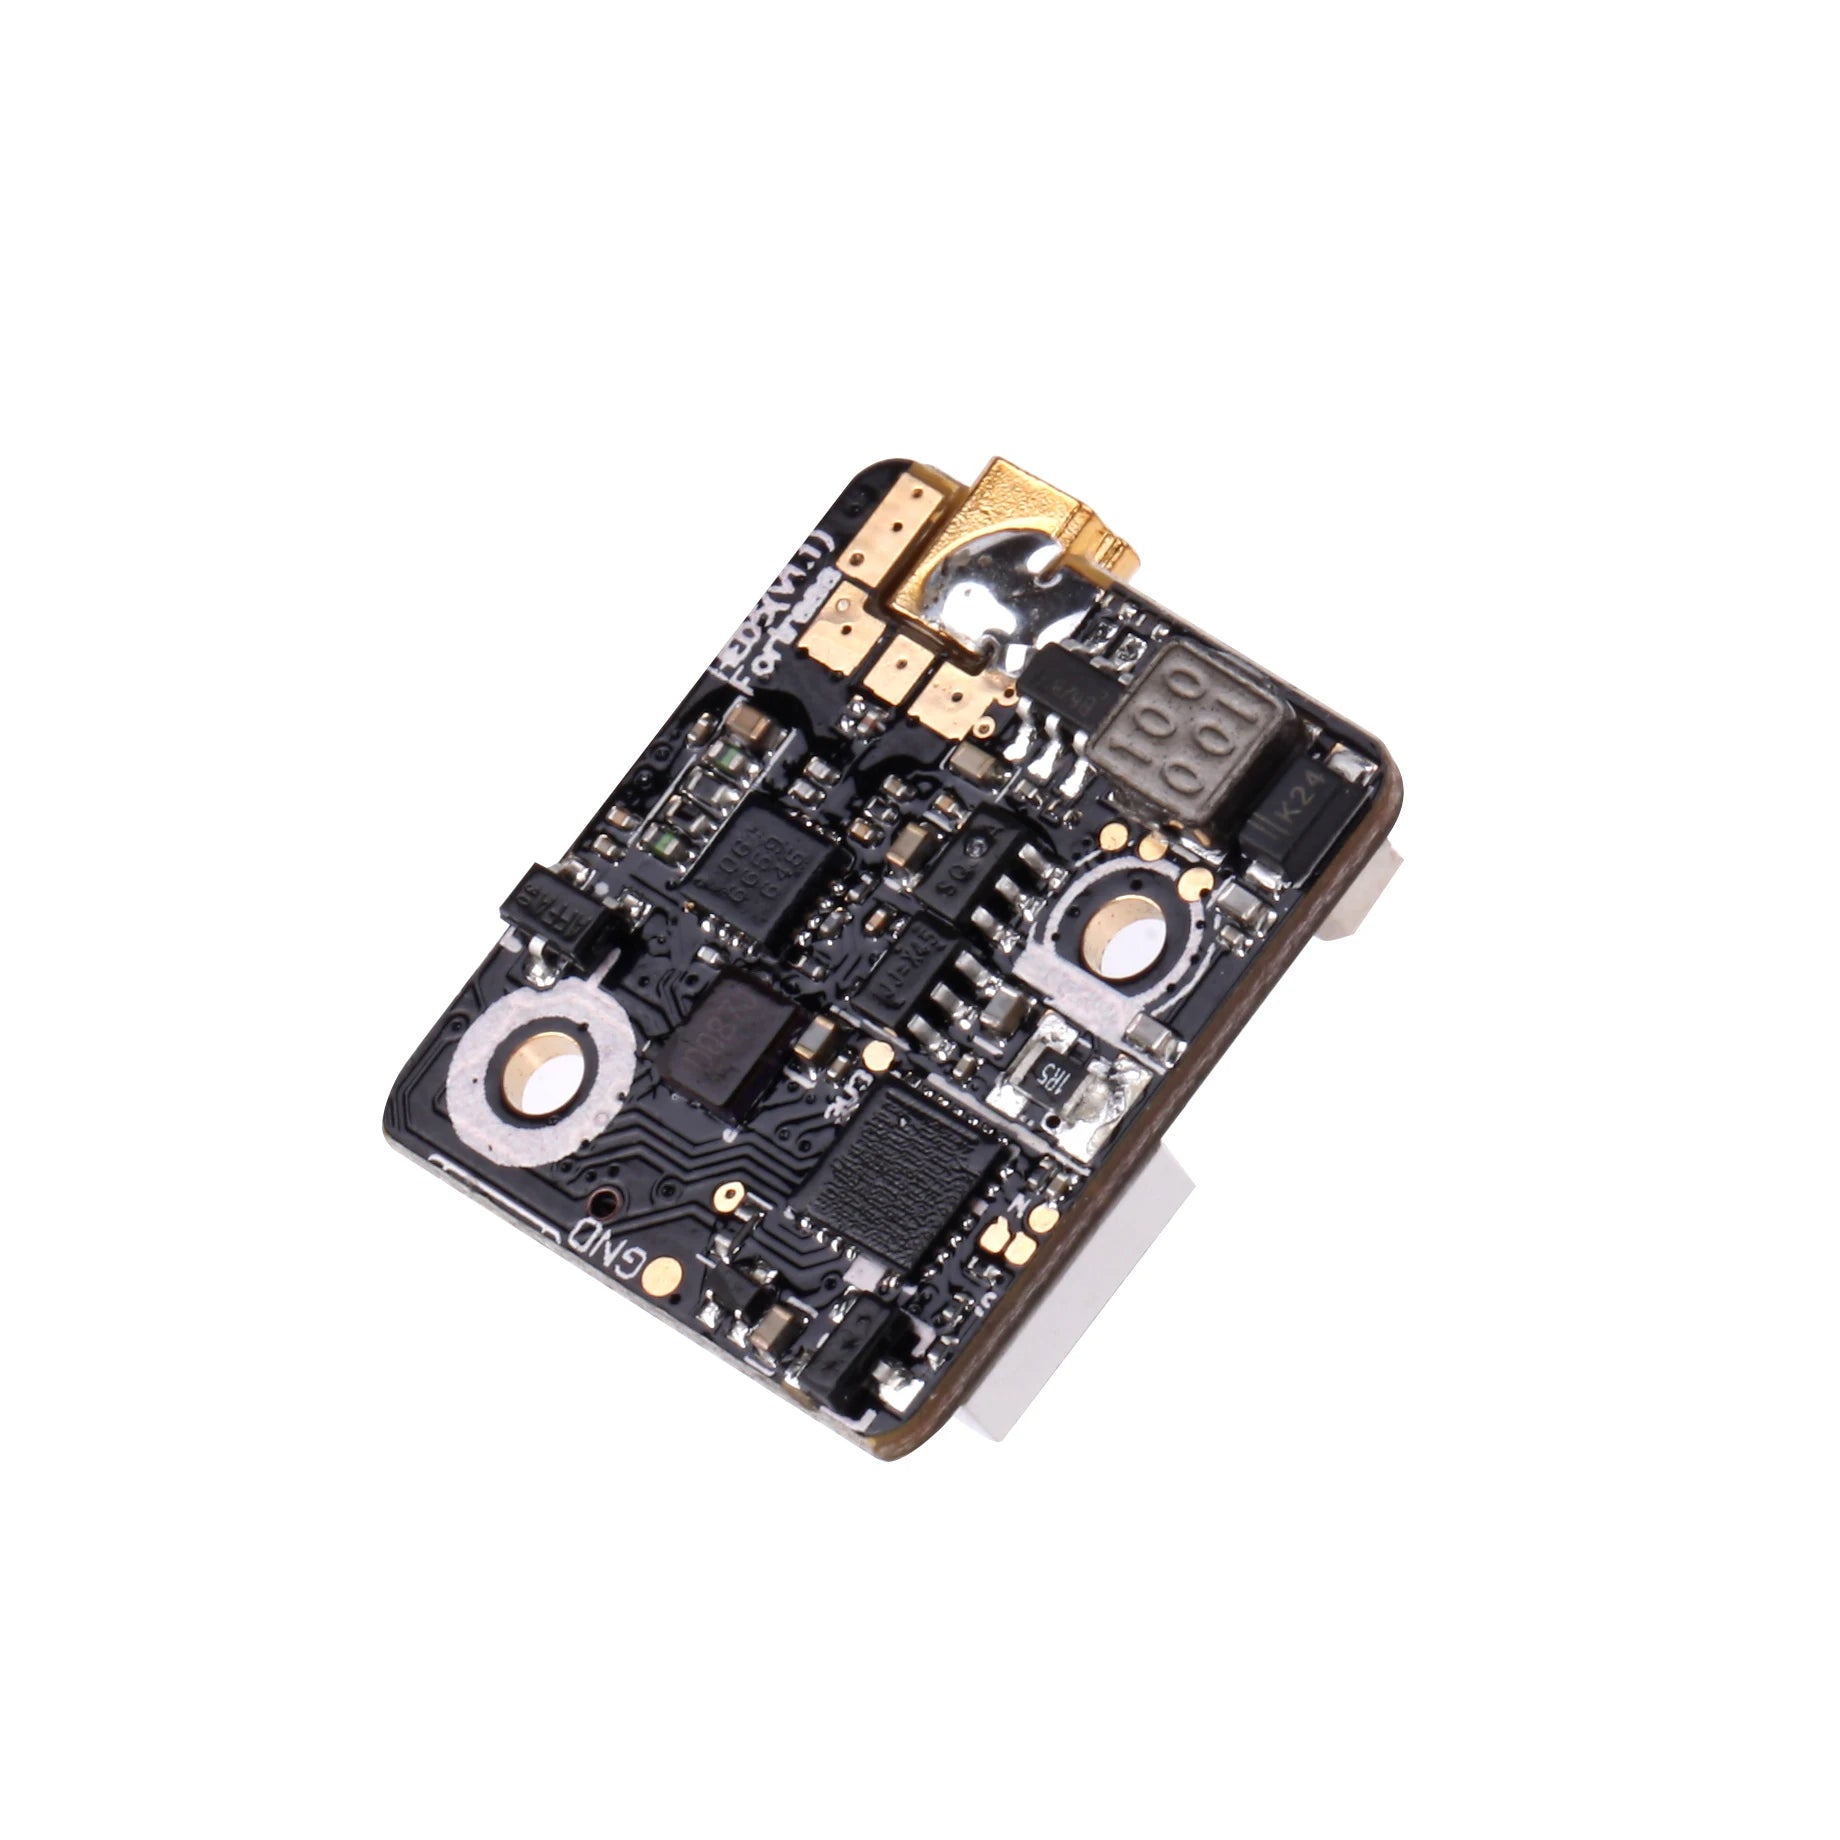 Hawkeye Firefly Fortress Micro FPV Camera, Package Included( optional ): 1 x Fortress 2.1mm 4:3